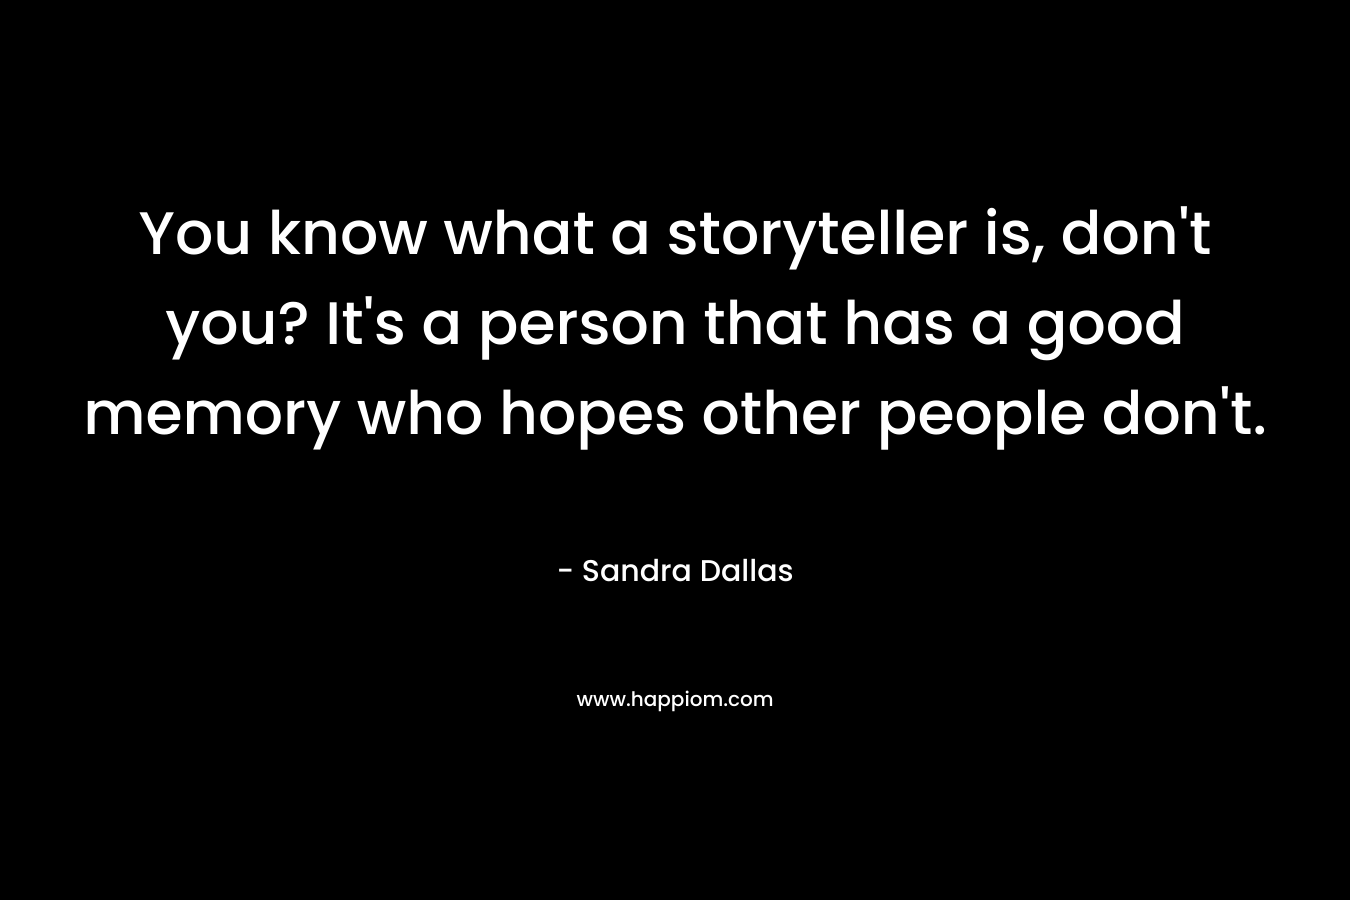 You know what a storyteller is, don’t you? It’s a person that has a good memory who hopes other people don’t. – Sandra Dallas